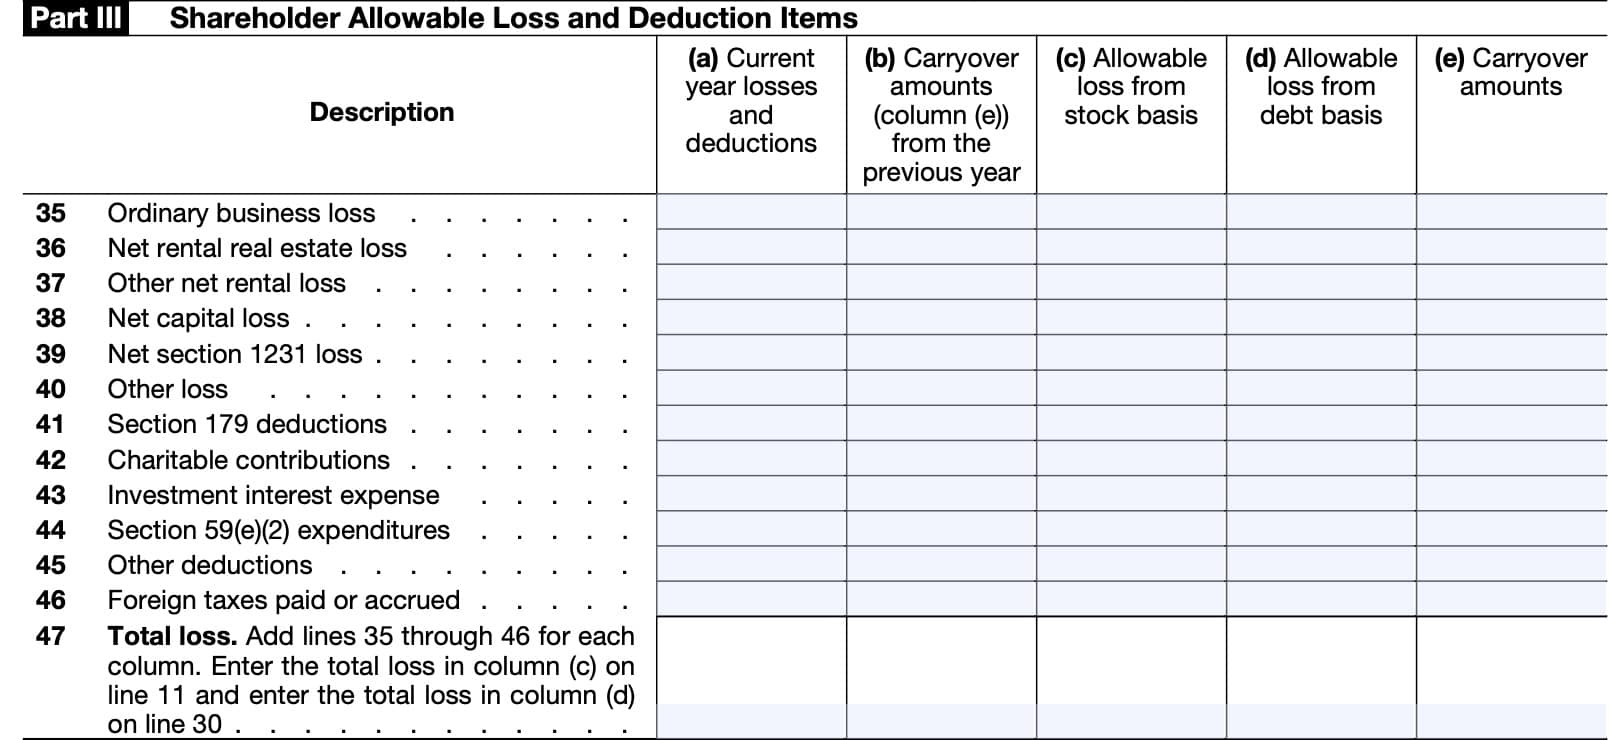 irs form 7203, part III: shareholder allowable loss and deduction items